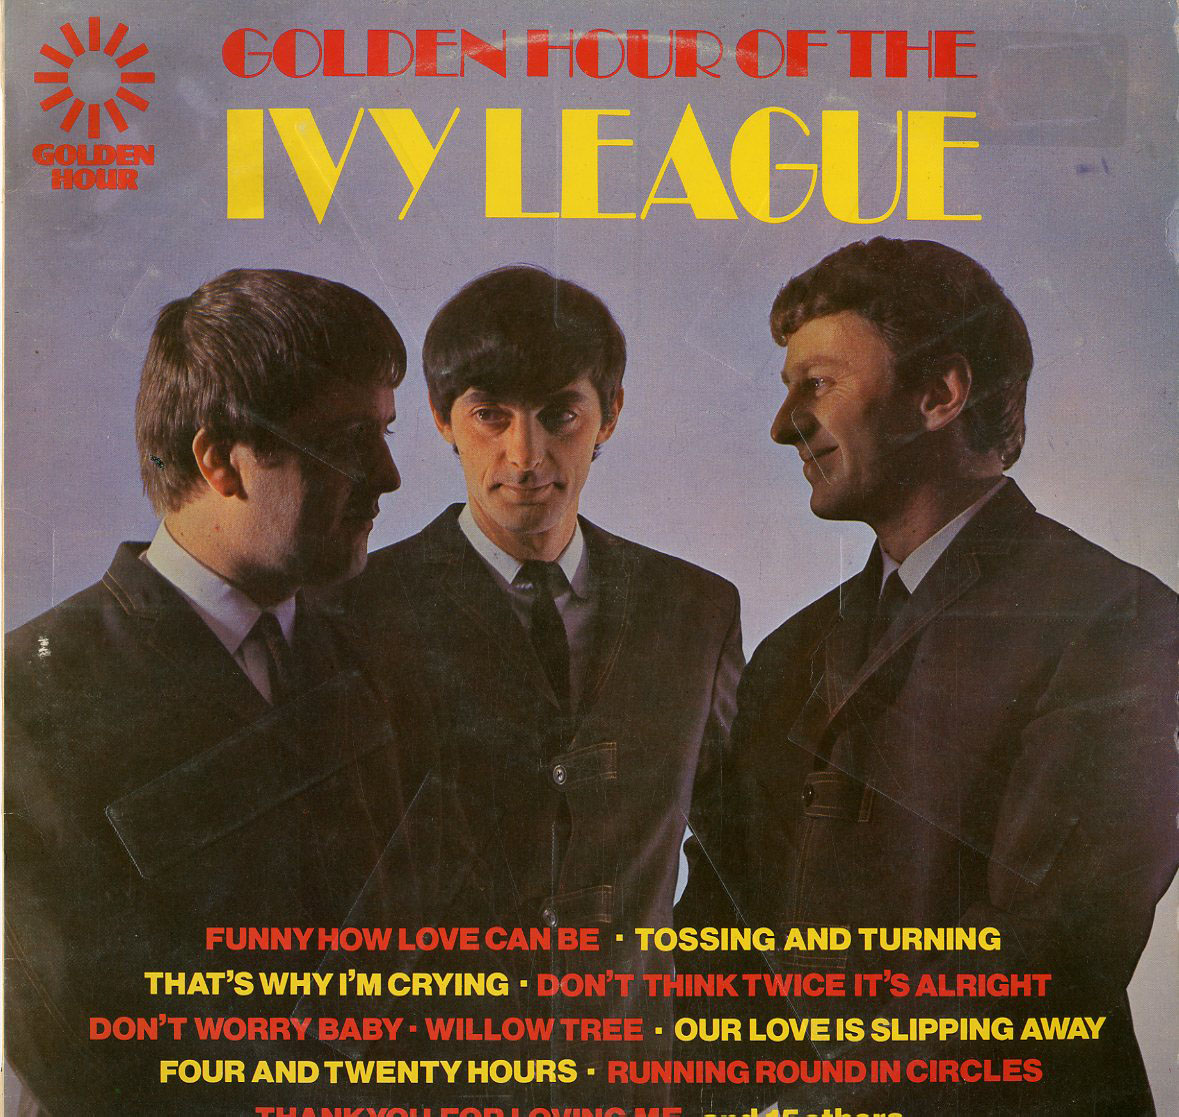 Albumcover Ivy League - Golden Hour Of The Ivy League